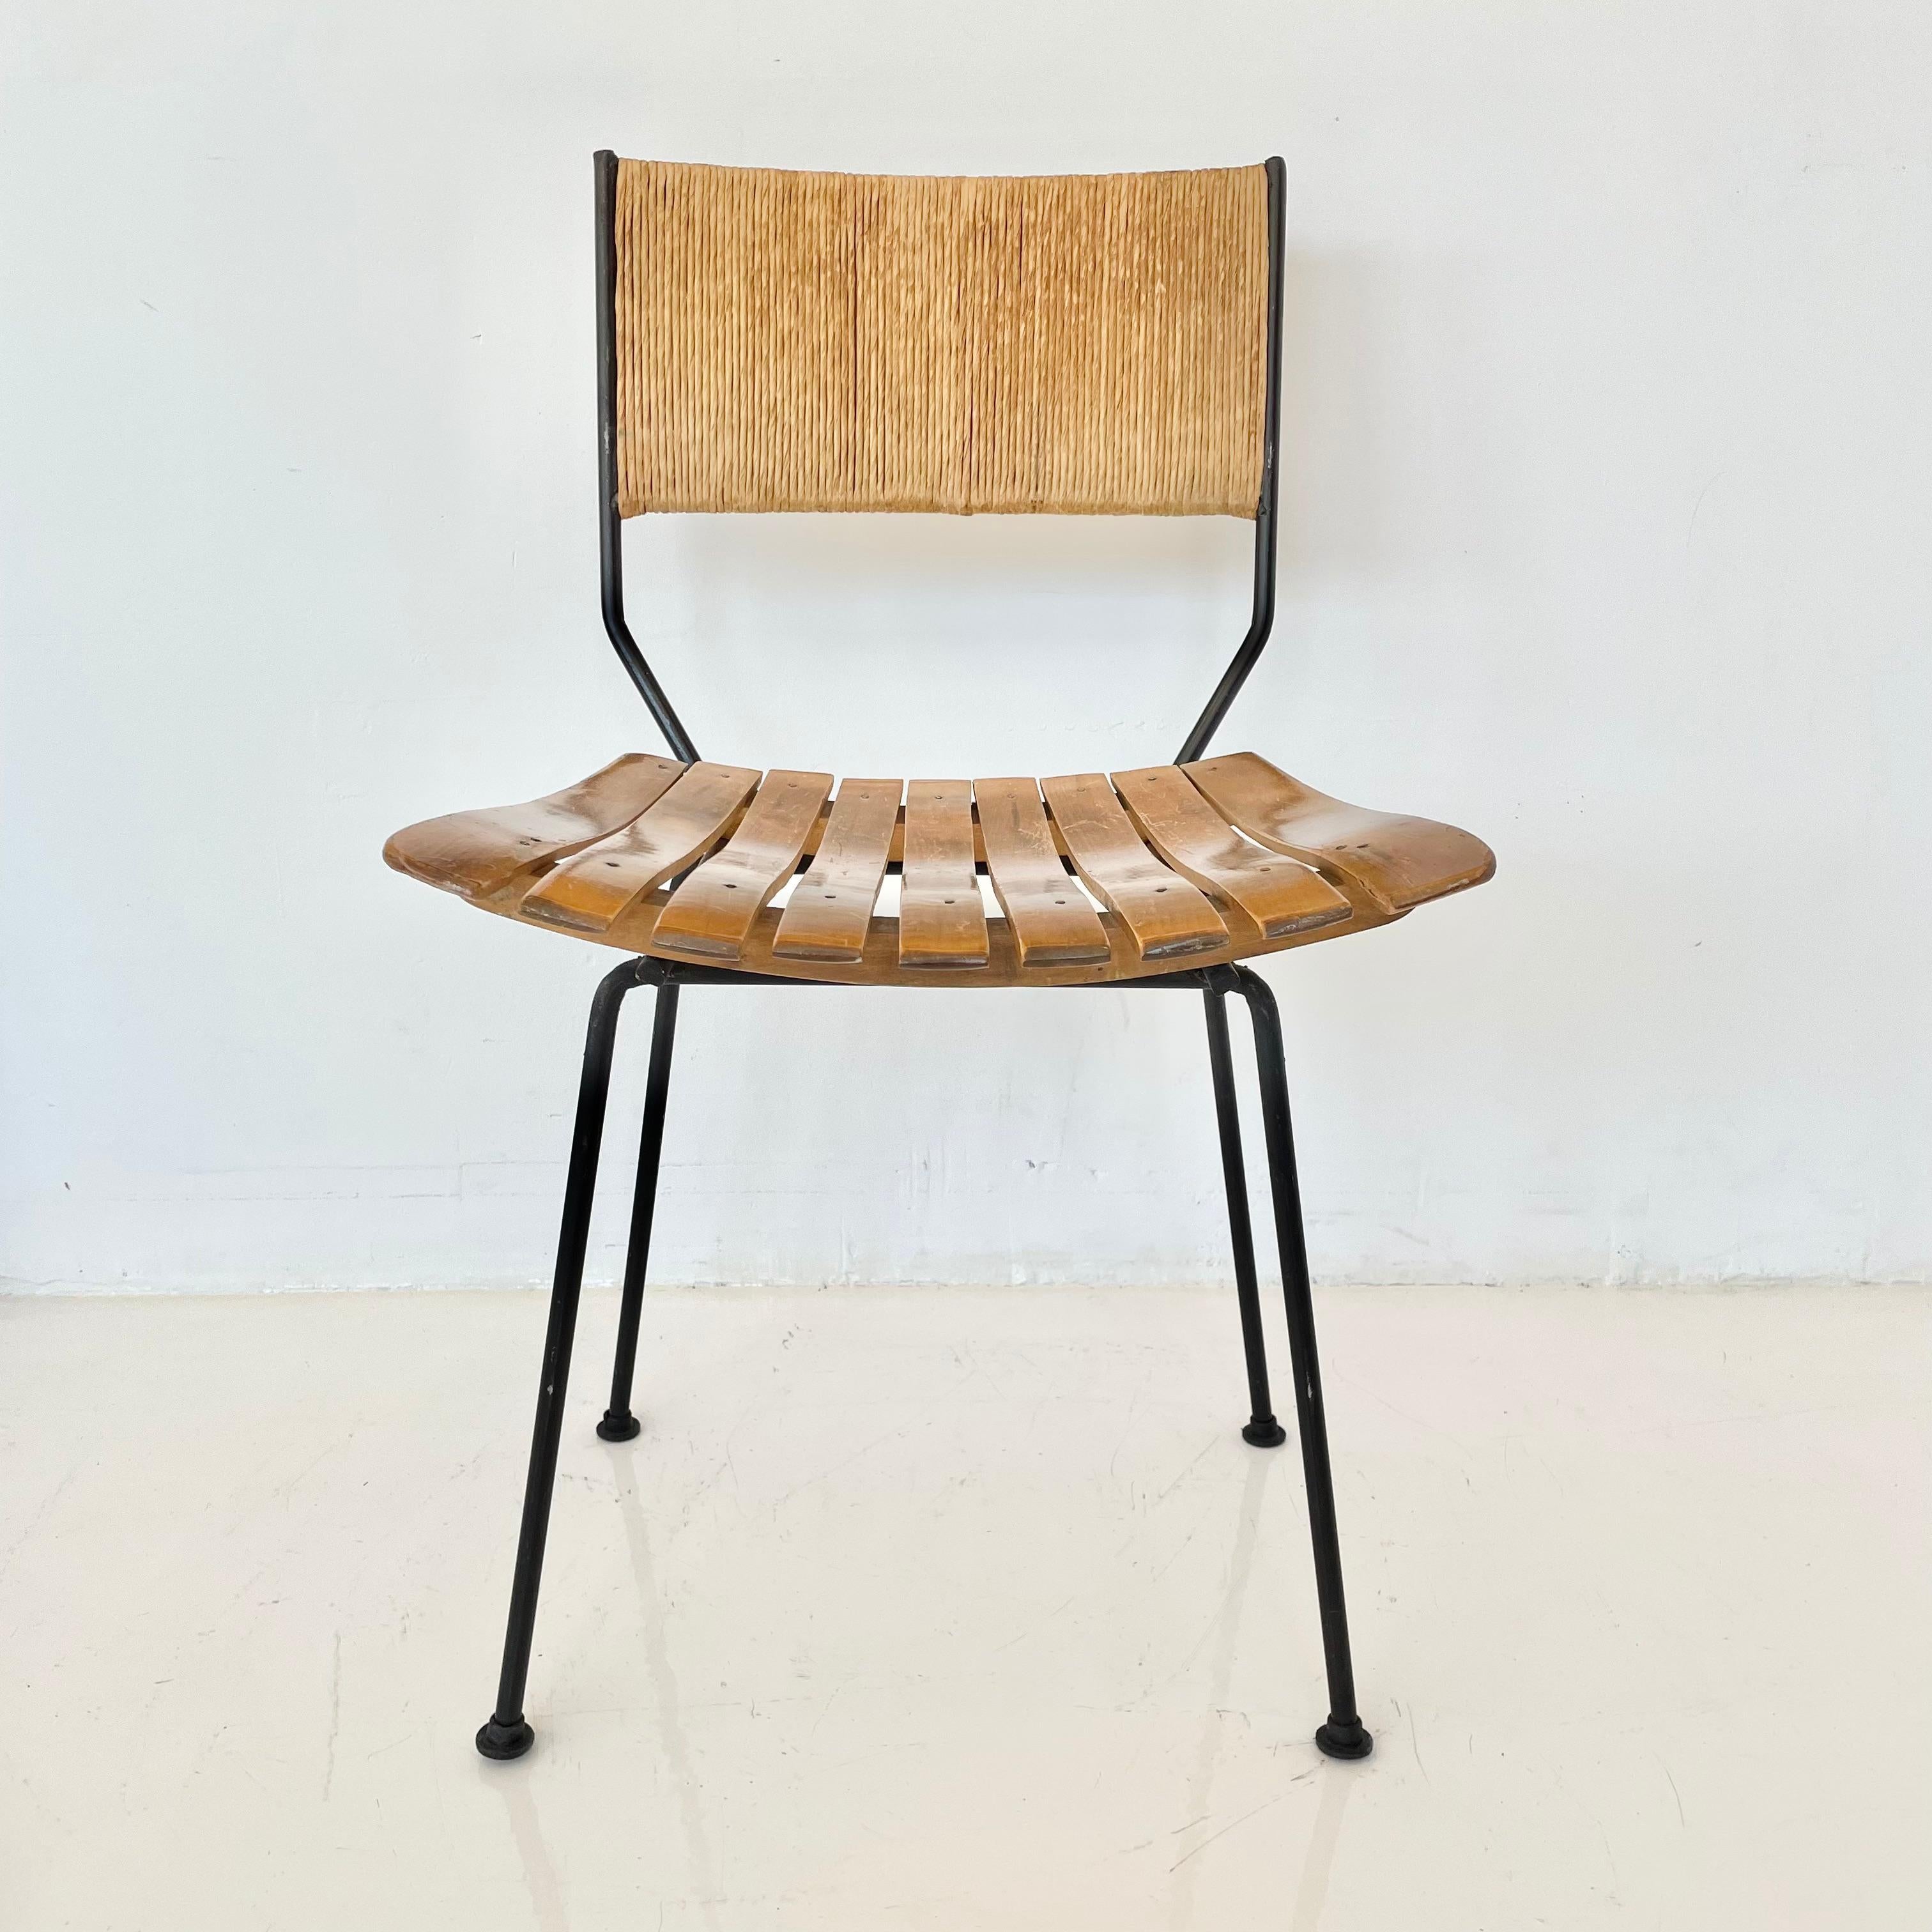 Sculptural Arthur Umanoff chair with signature rush back, slatted wood seat, and iron legs. Metal frame in a vintage adobe finish. Rare design. Floating seat. Good vintage condition. Only one chair still available. 
      